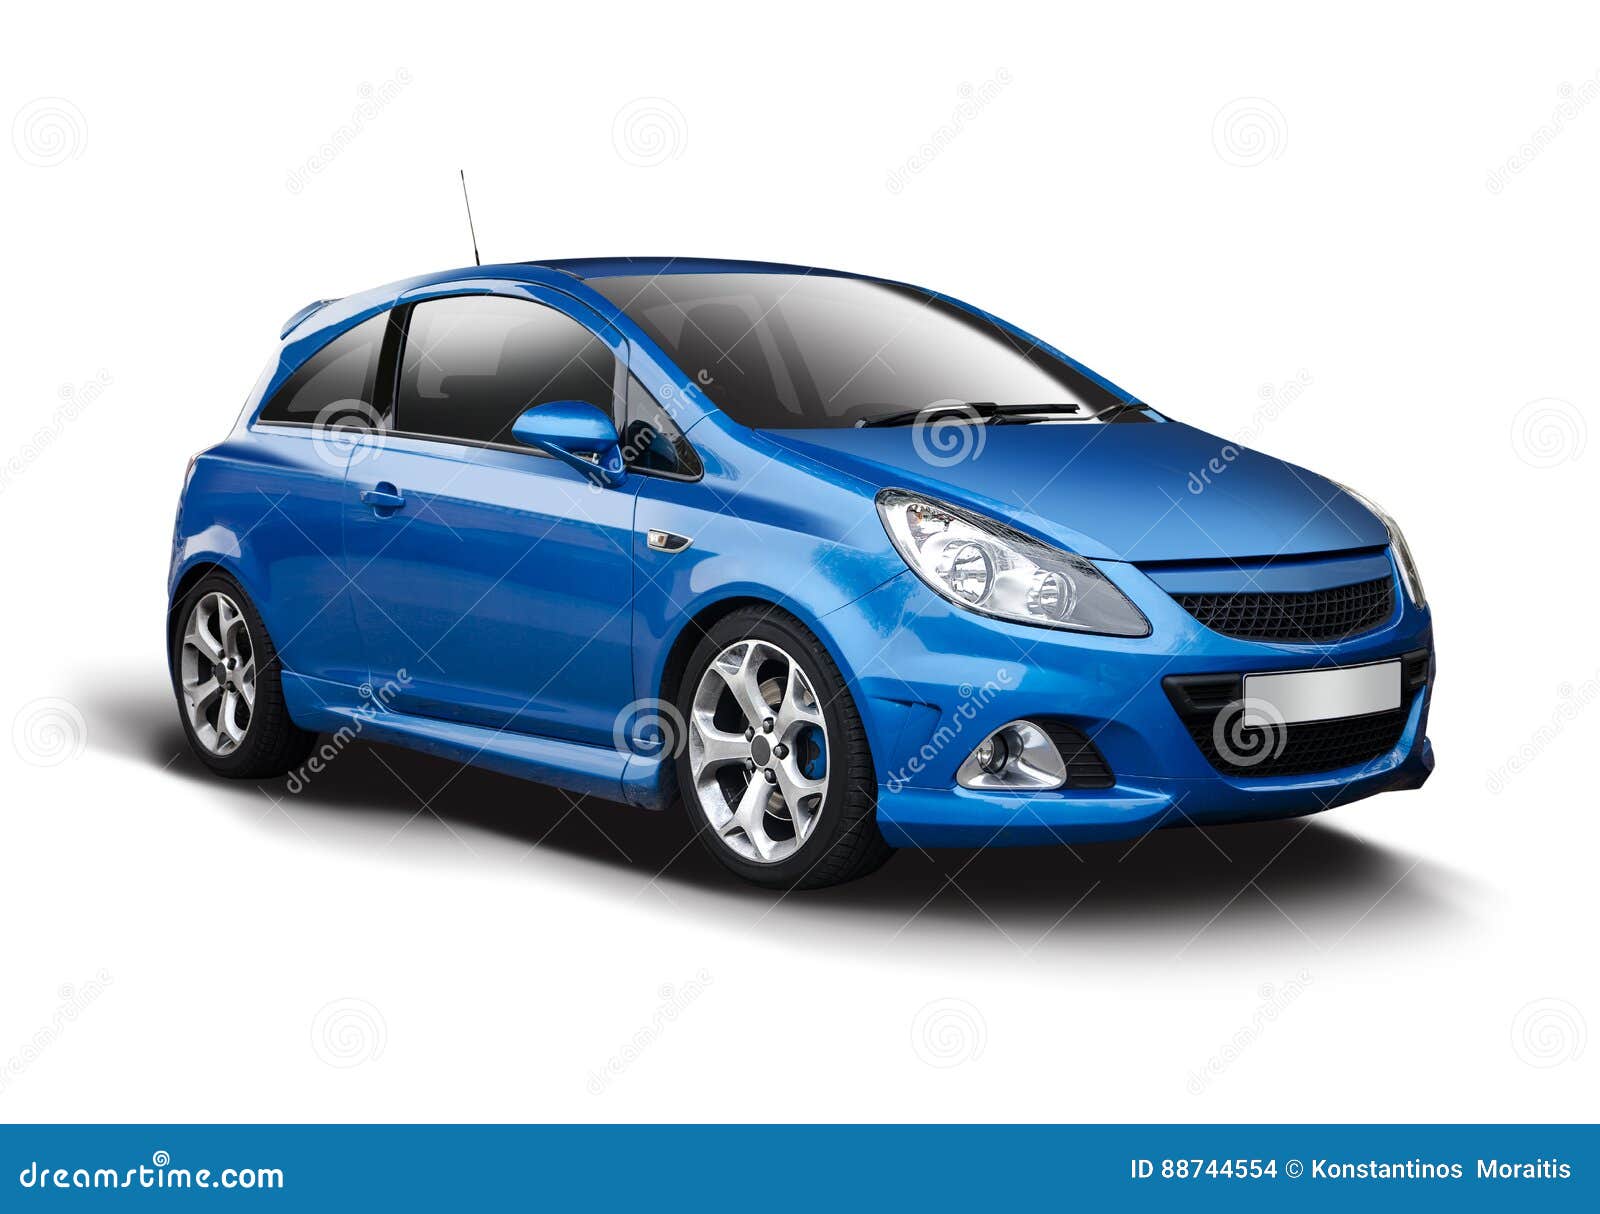 Opel Corsa images (6 of 7)